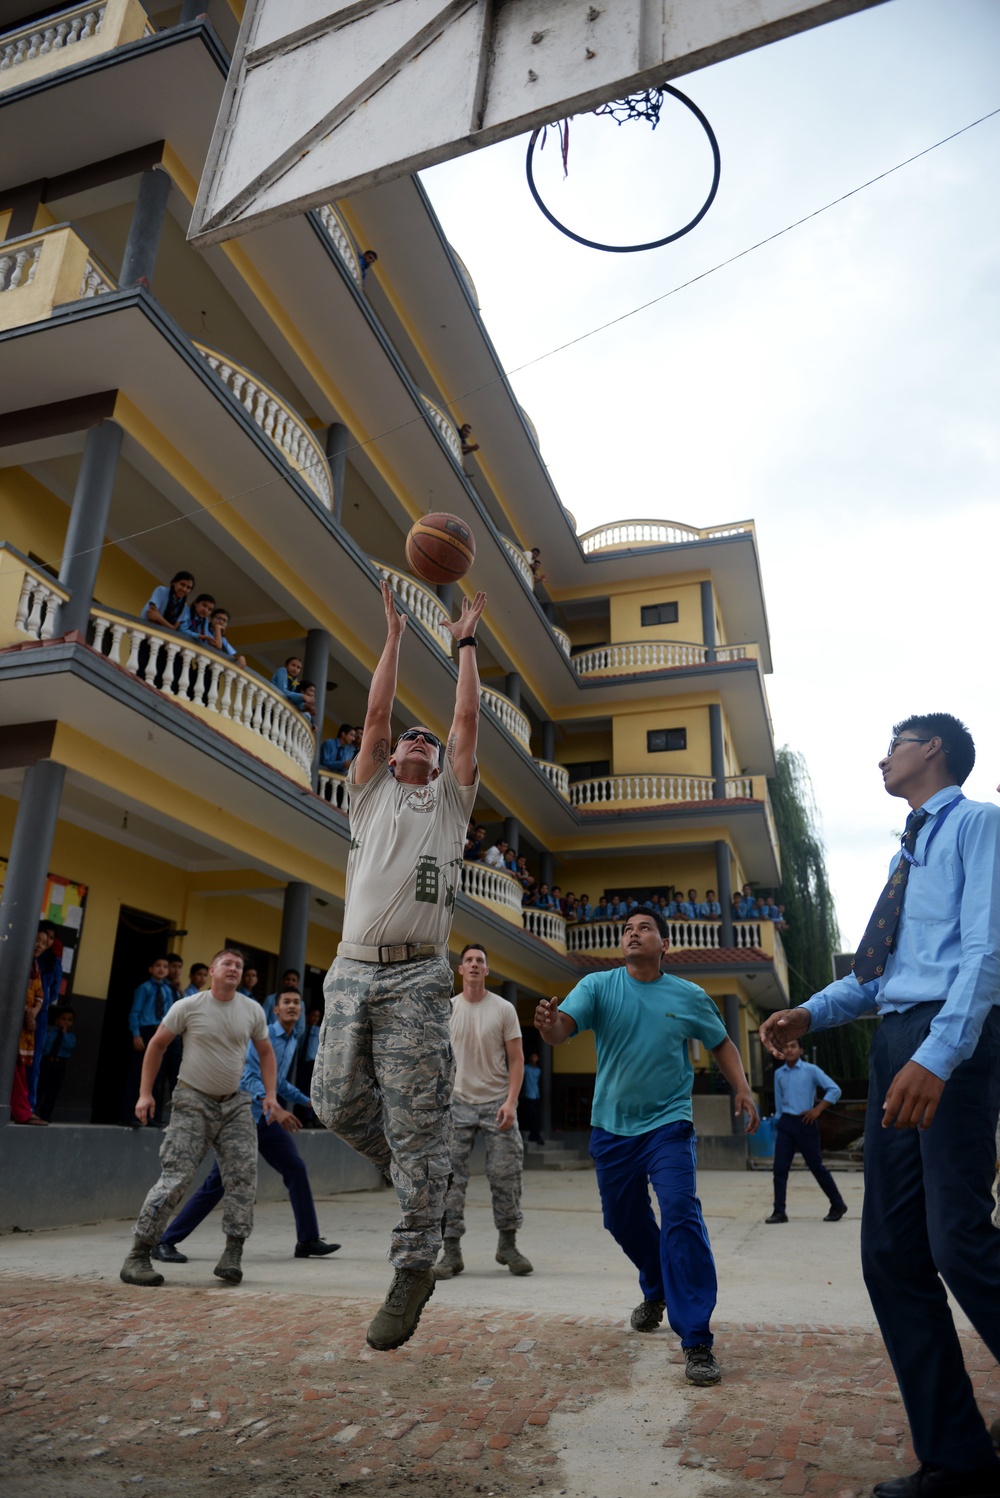 Community day connects Andersen Airmen, Nepali children on July 4th